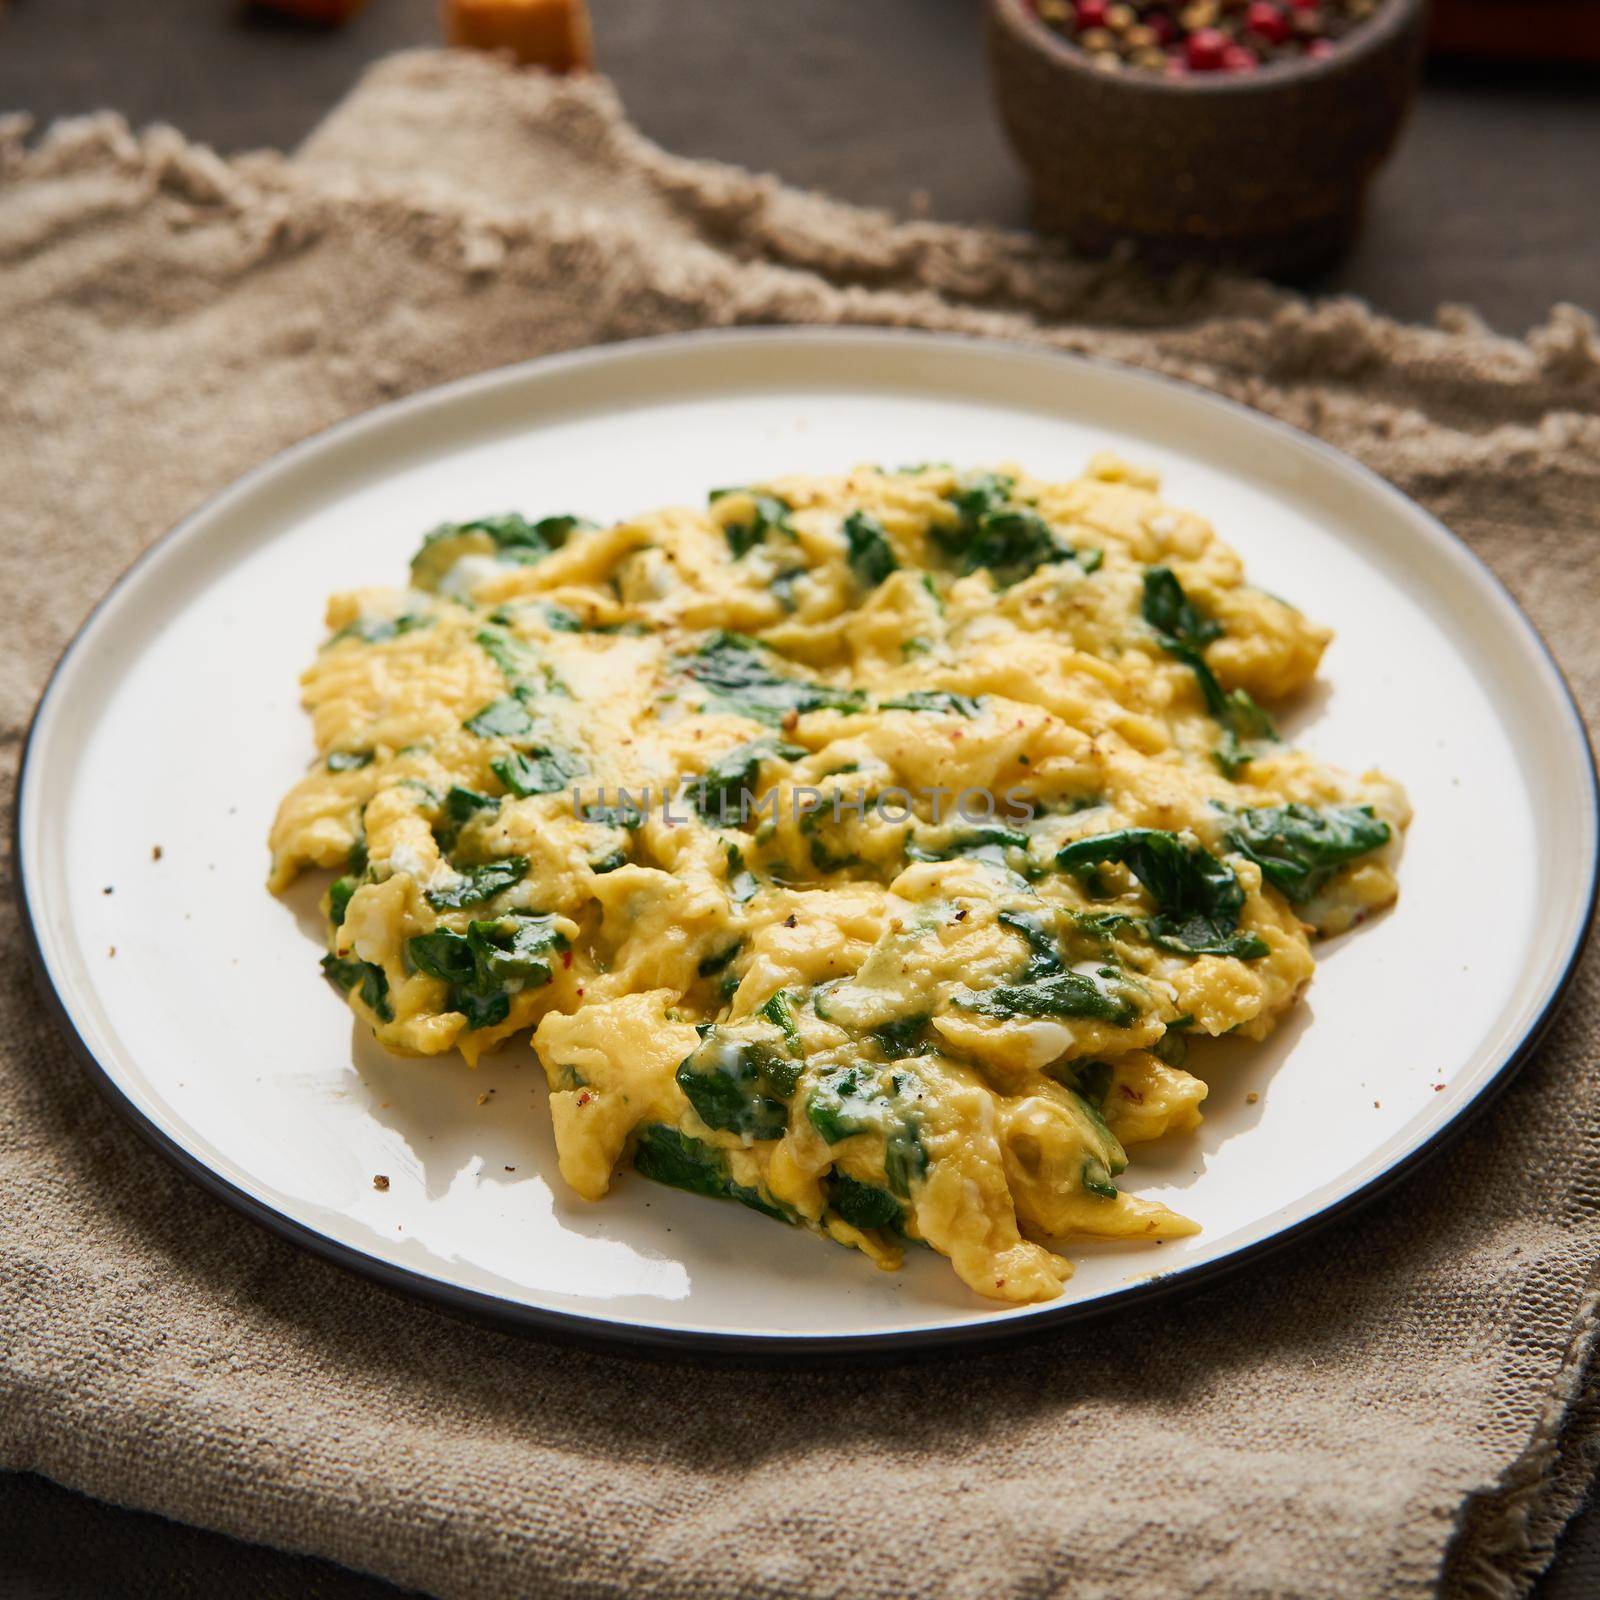 Scrambled eggs with spinach, cup of tea on dark brown background by NataBene